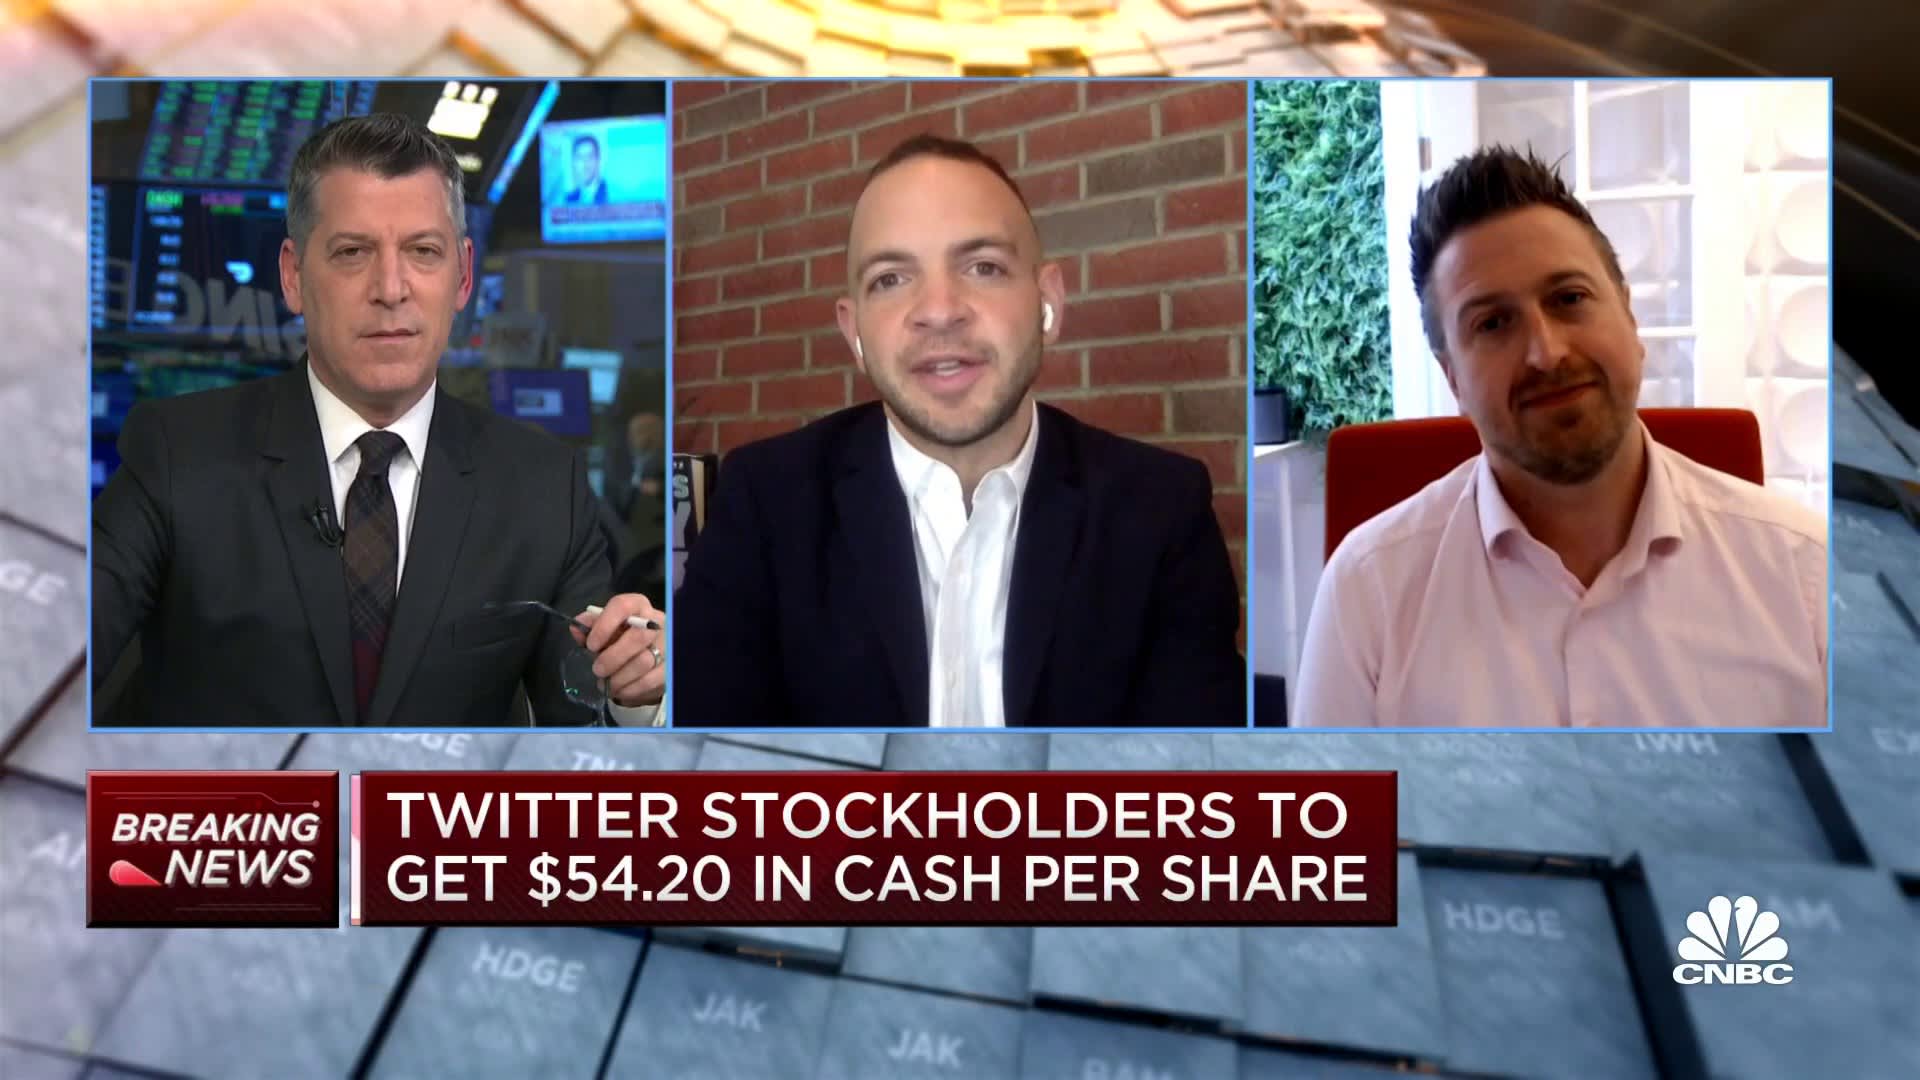 Big Technology’s Alex Kantrowitz and Platformer’s Casey Newton react to Musk’s Twitter buy?